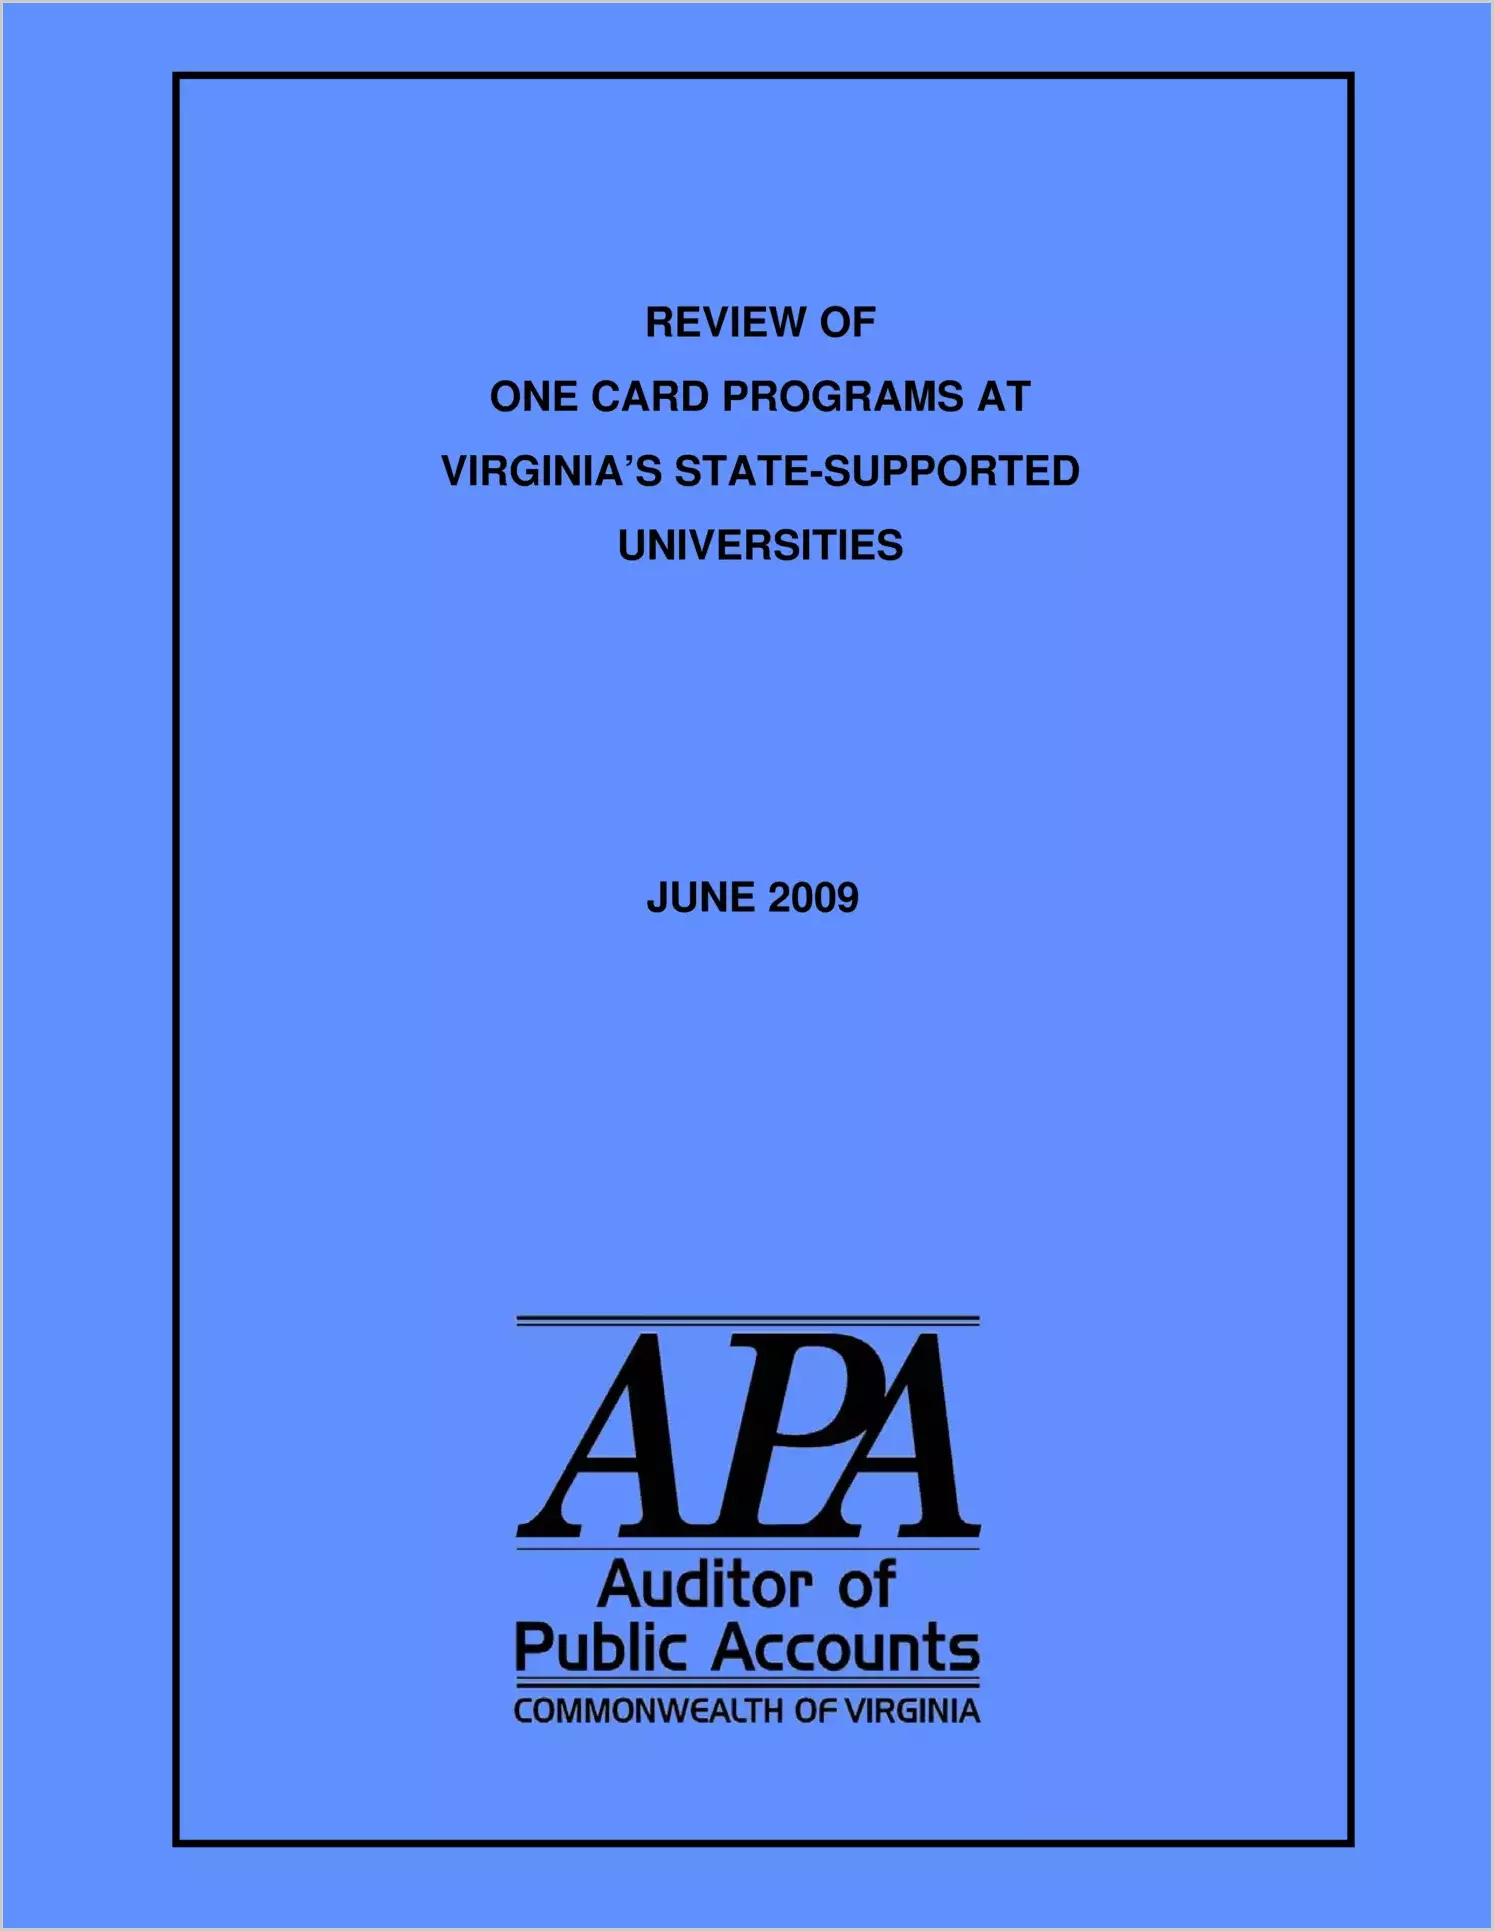 Review of One Card Programs at Virginia's State-Supported Universities